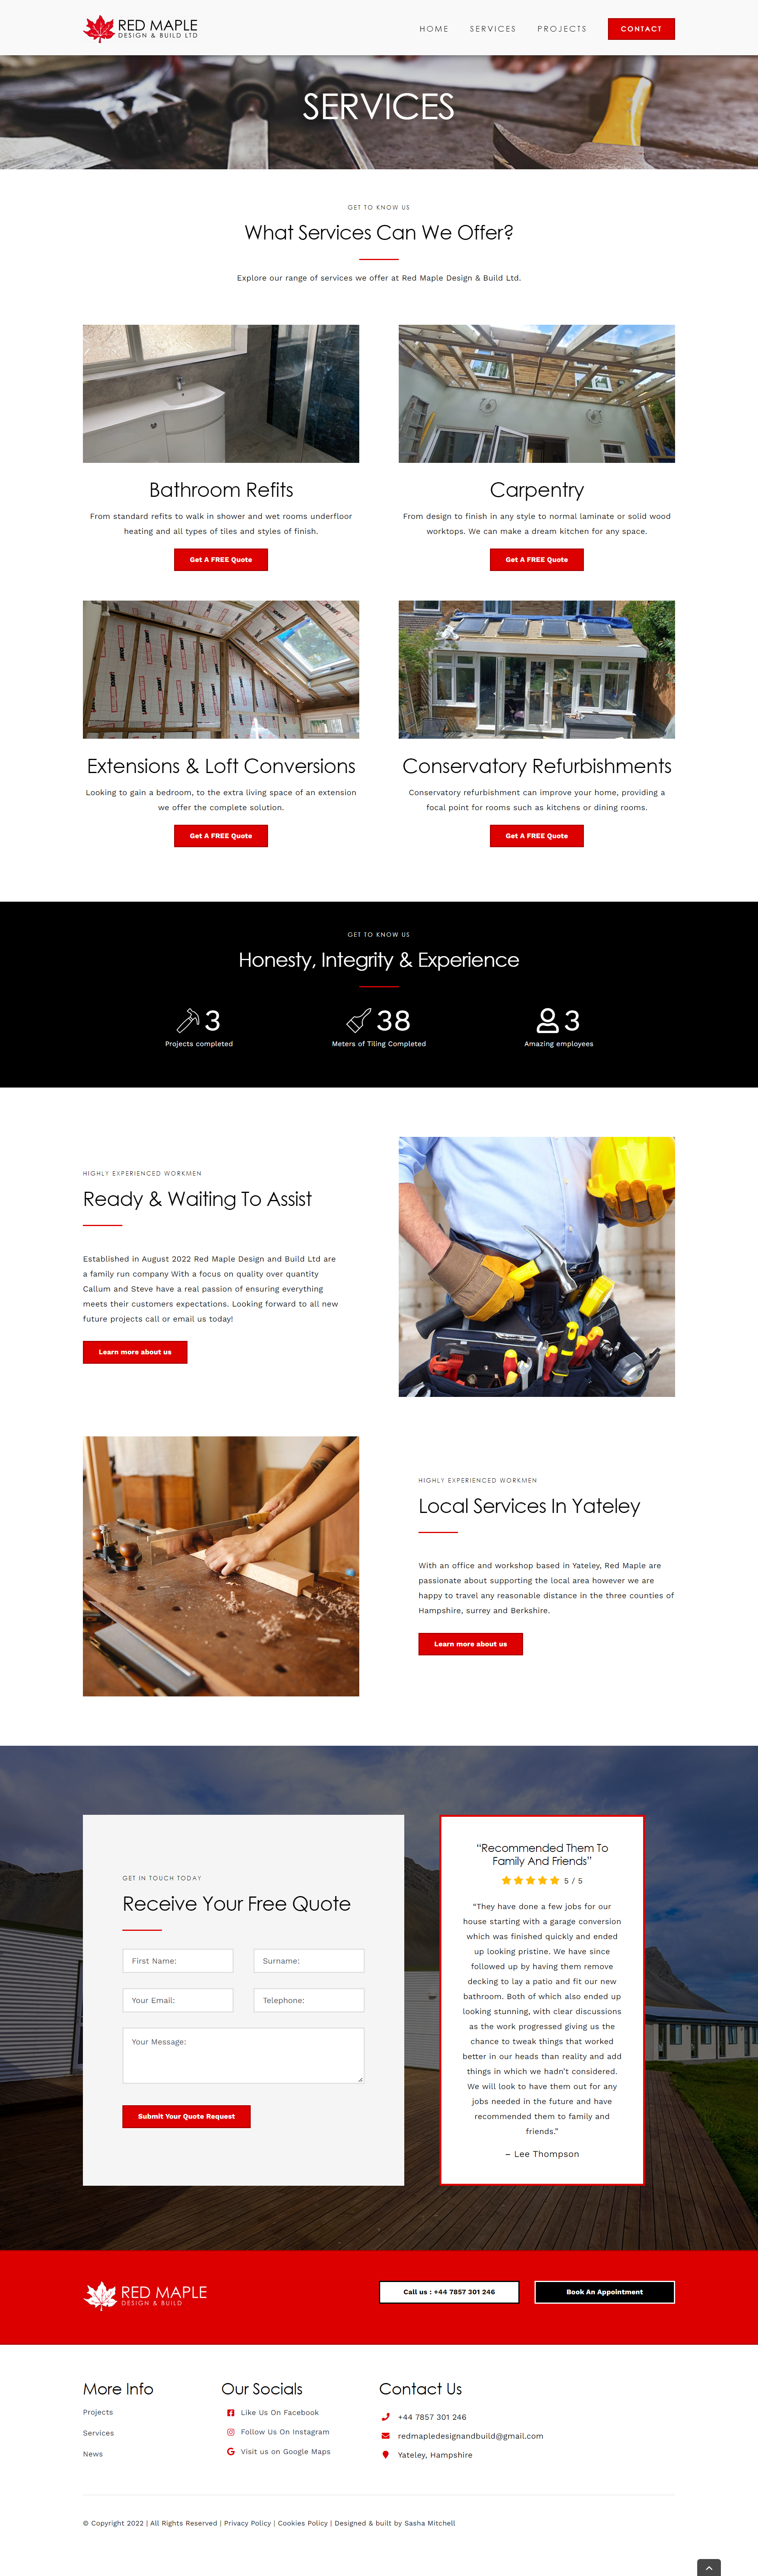 Red Maple Design & Build Services Page Screenshot Chell Web & Design